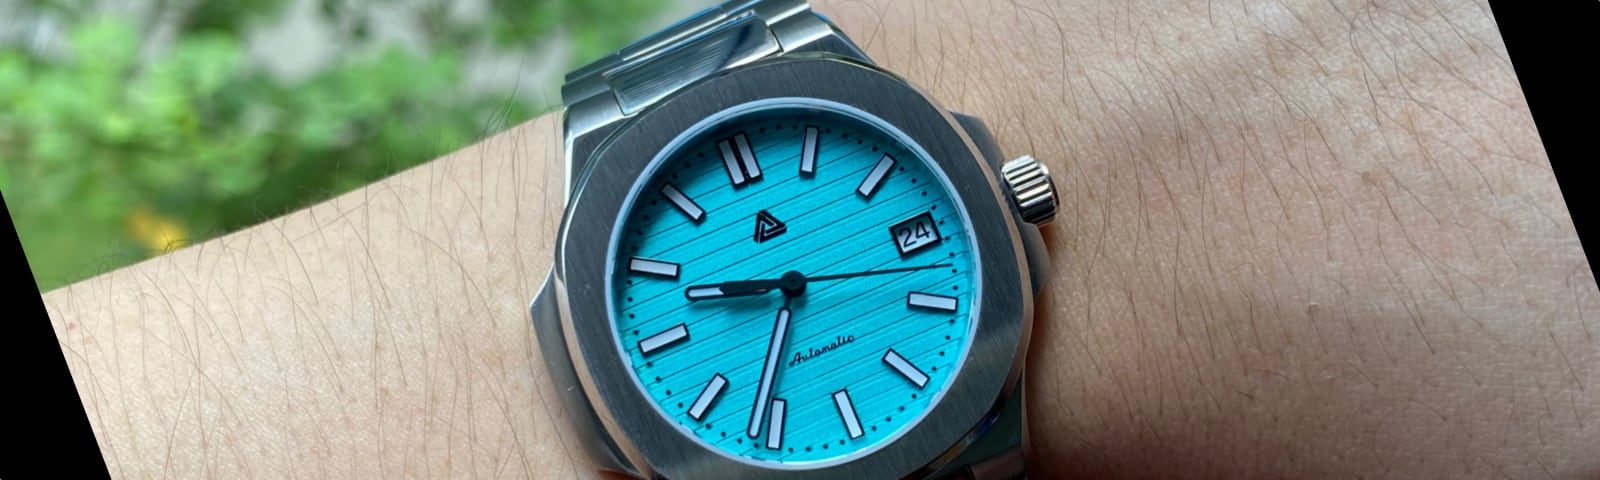 Cool New Digital Watches That Give a Retro Vibe | Men's Journal - Men's  Journal